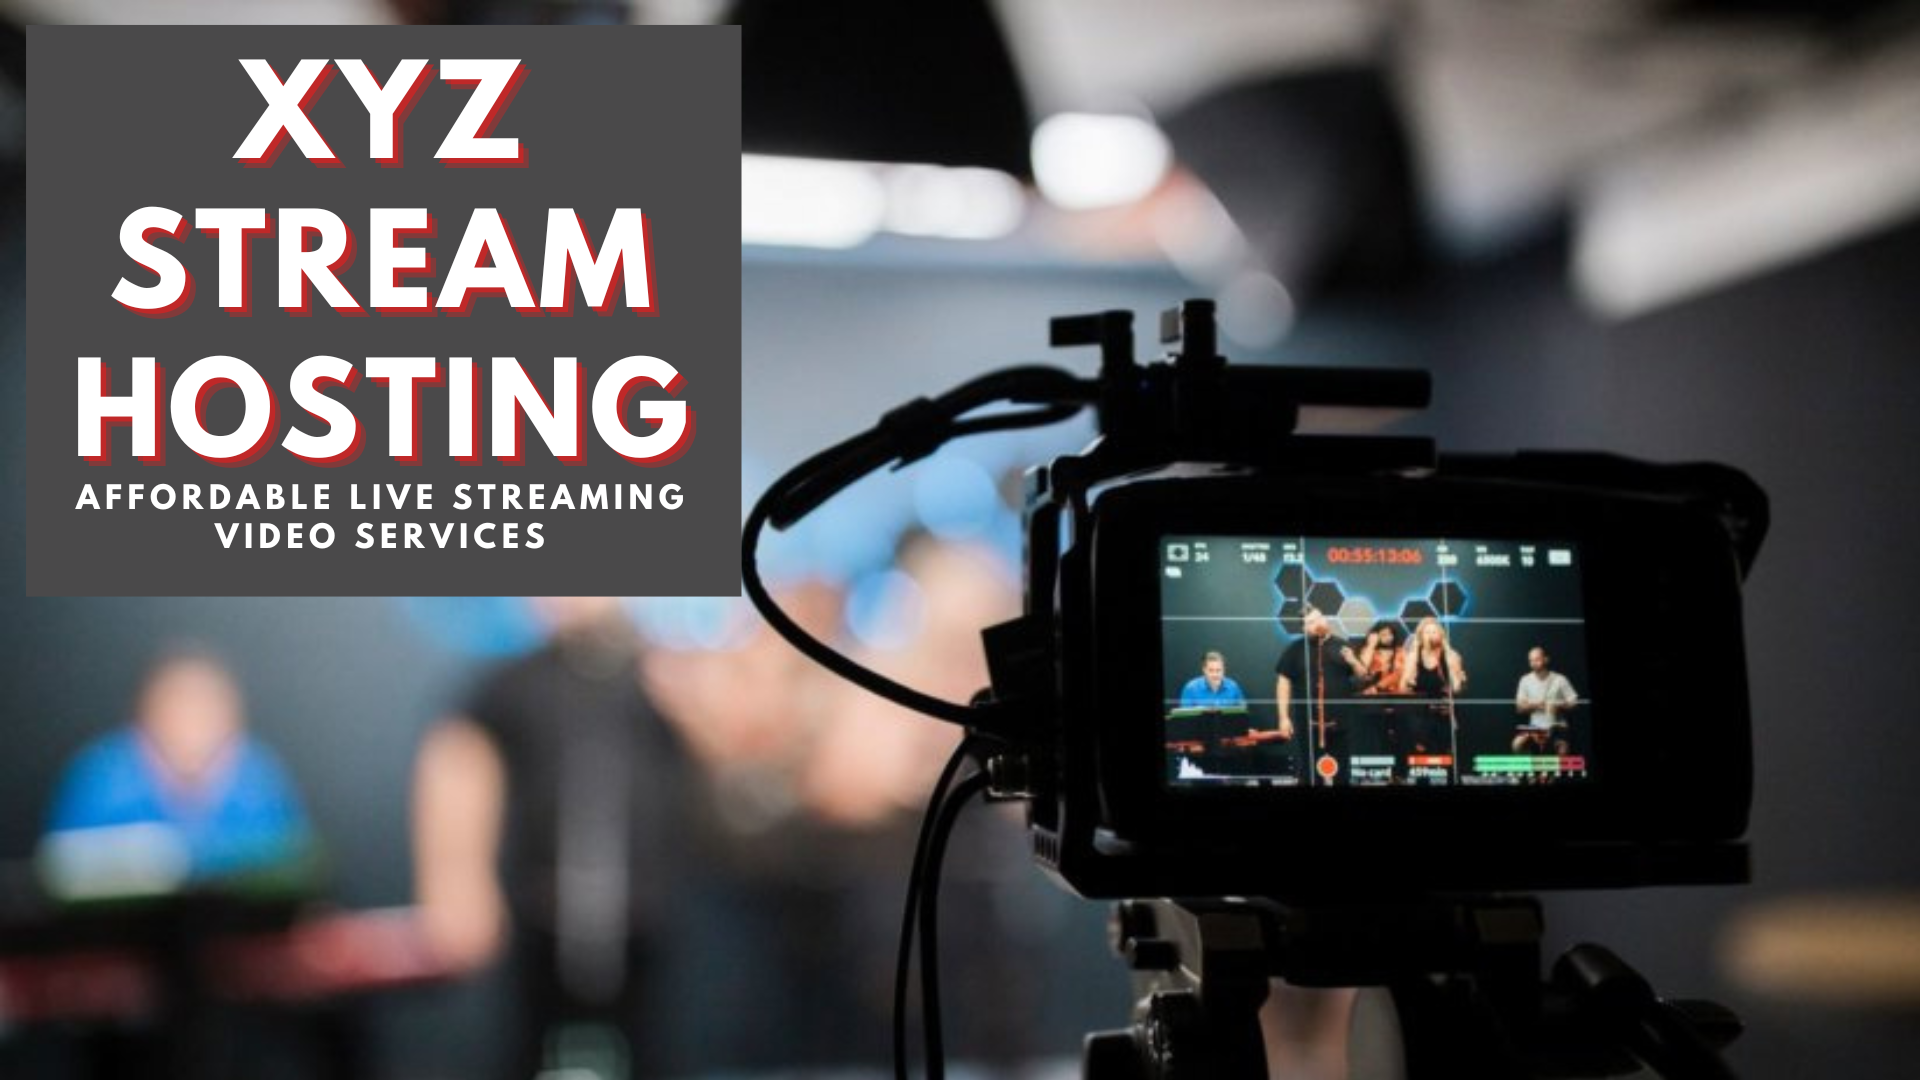 XYZ Stream Hosting - Affordable Live Streaming Video Services